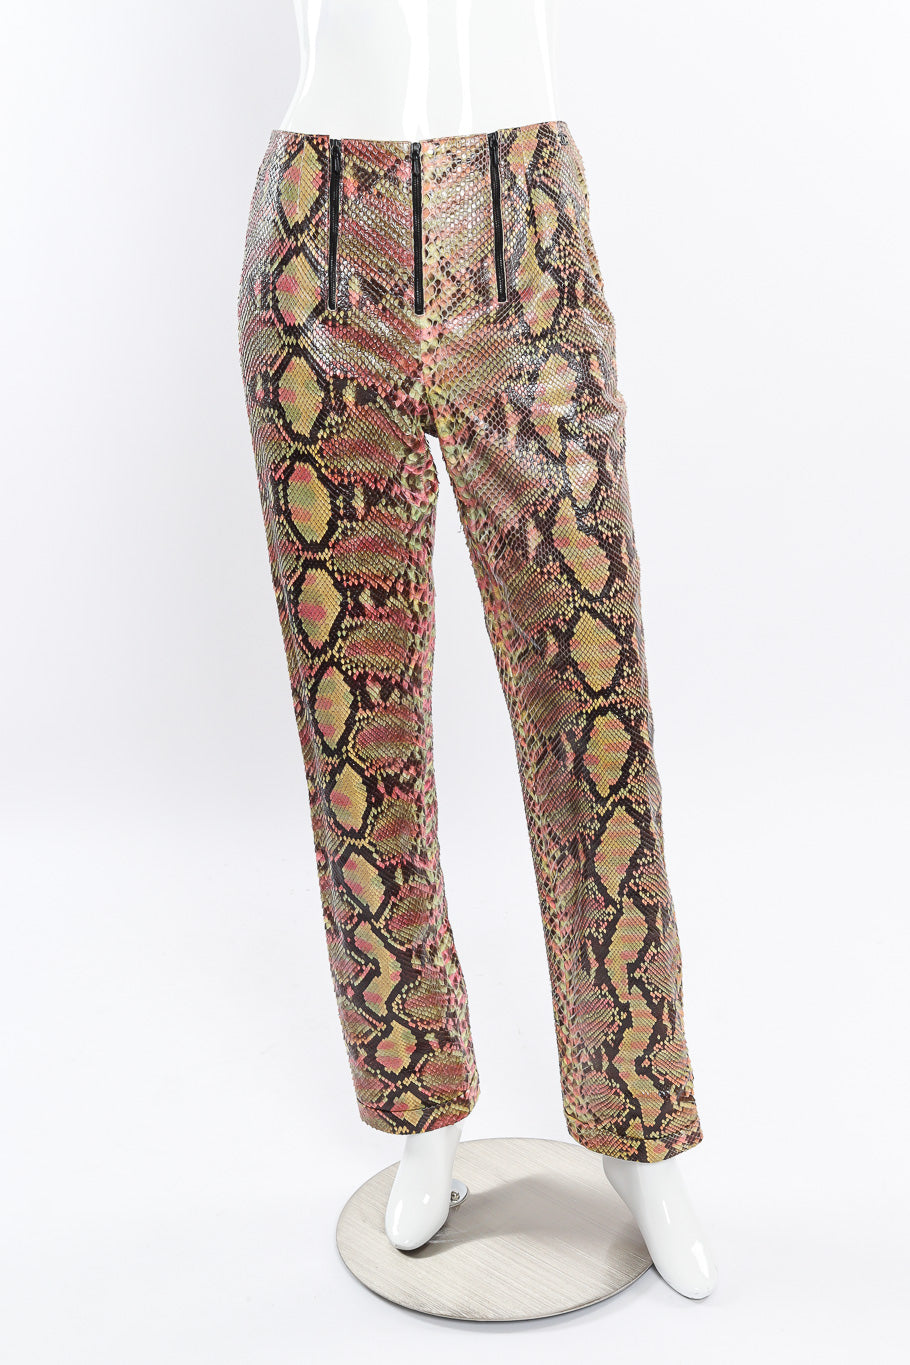 Chanel S/S 2000 Python Zip Front Pant